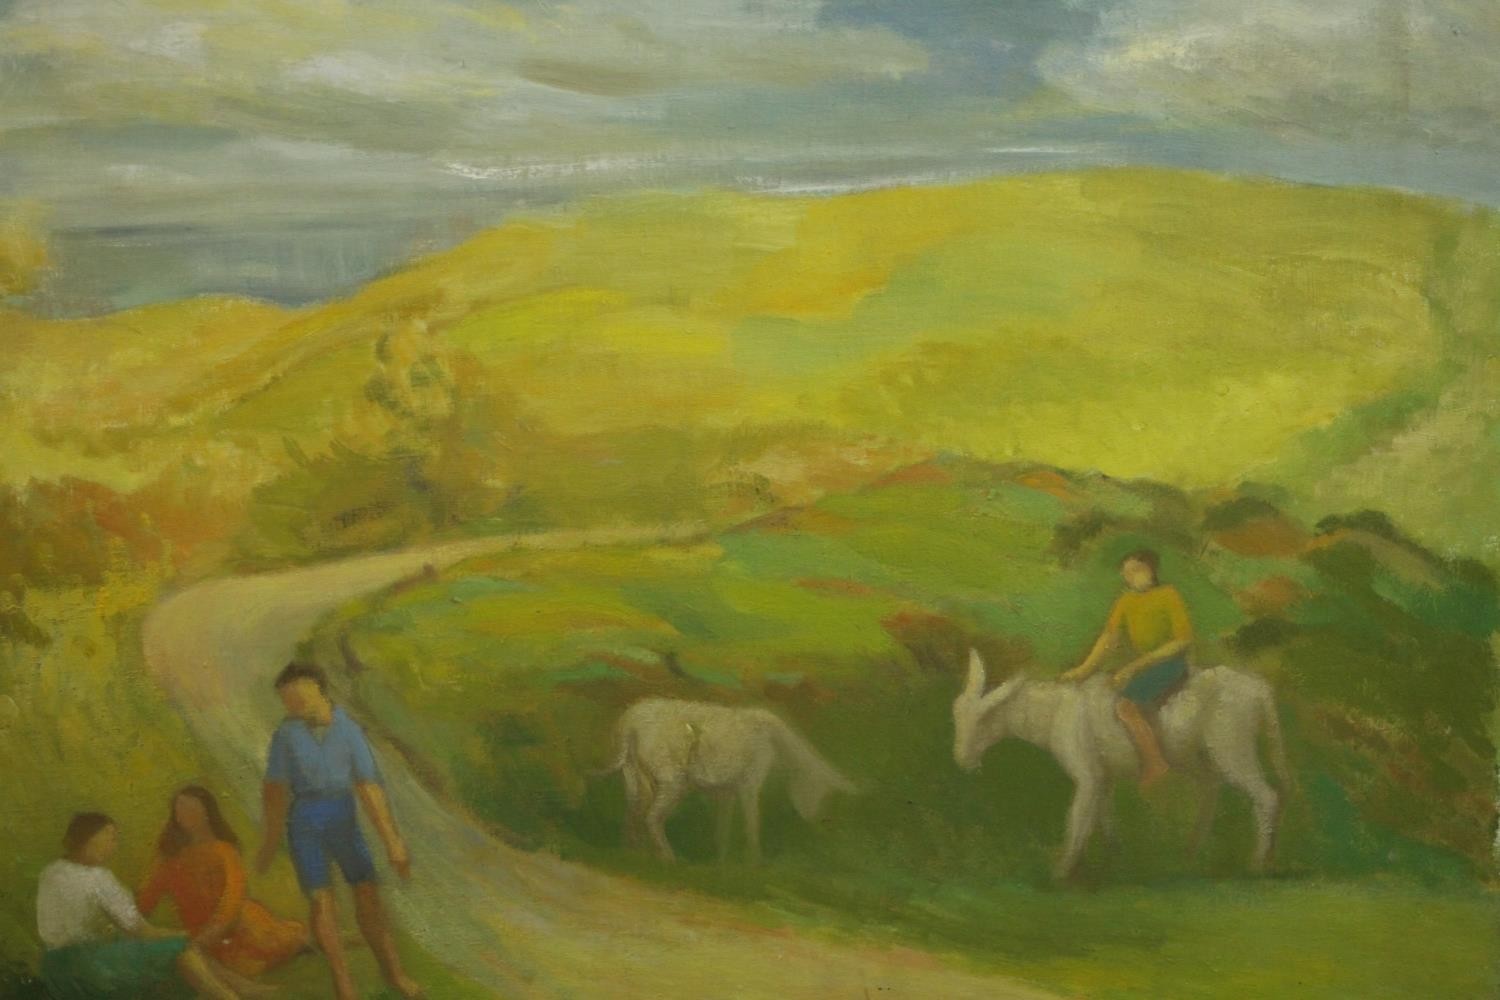 An unframed mid-century oil on canvas of a hillside landscape with figures and donkeys, unsigned.